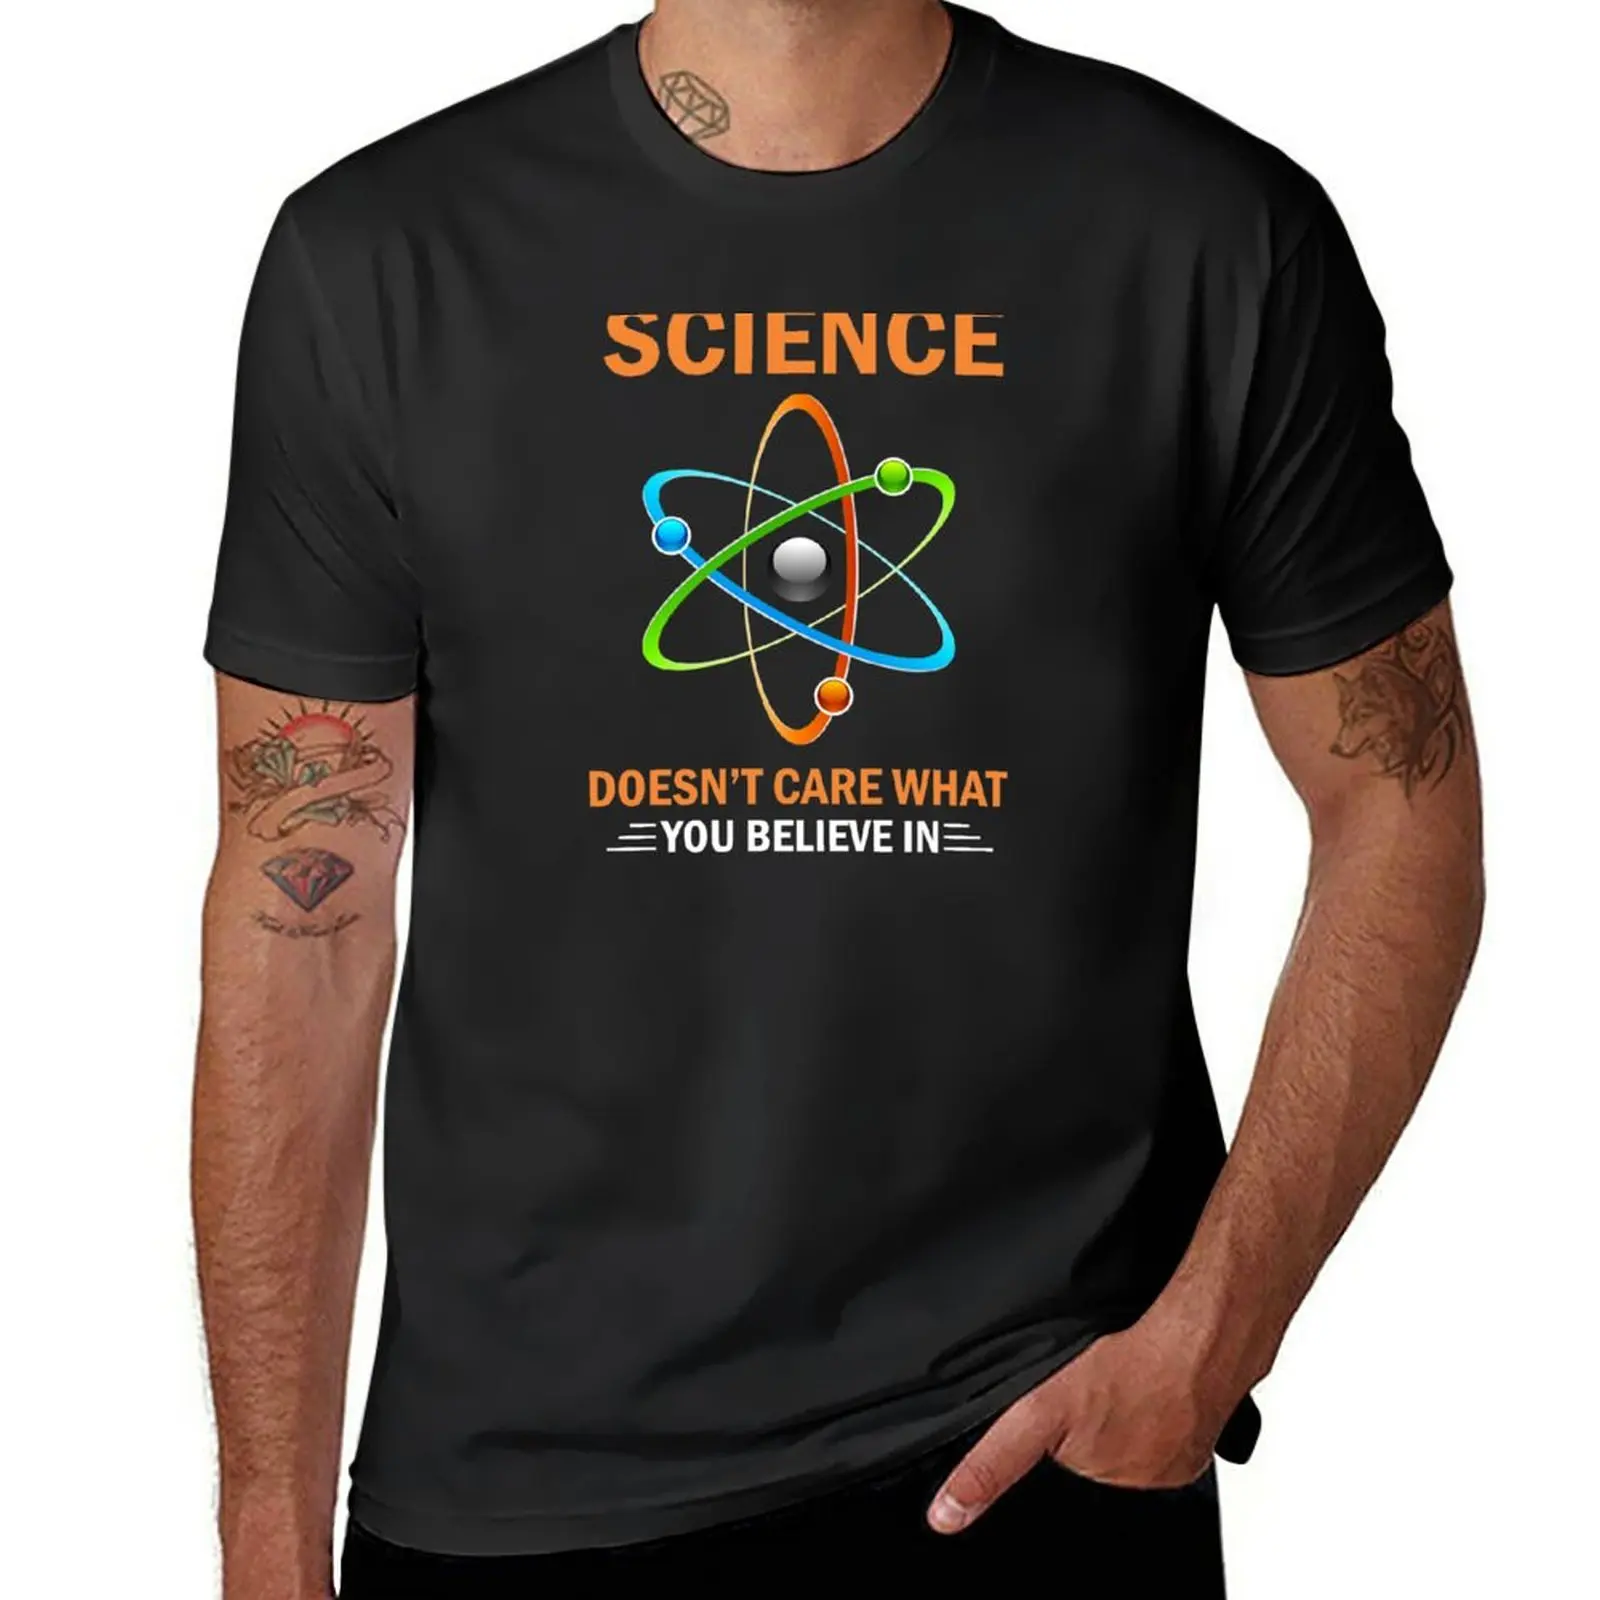 

New Science Doesn't Care What You Believe In T-Shirt tees plain t-shirt Short sleeve tee mens t shirts